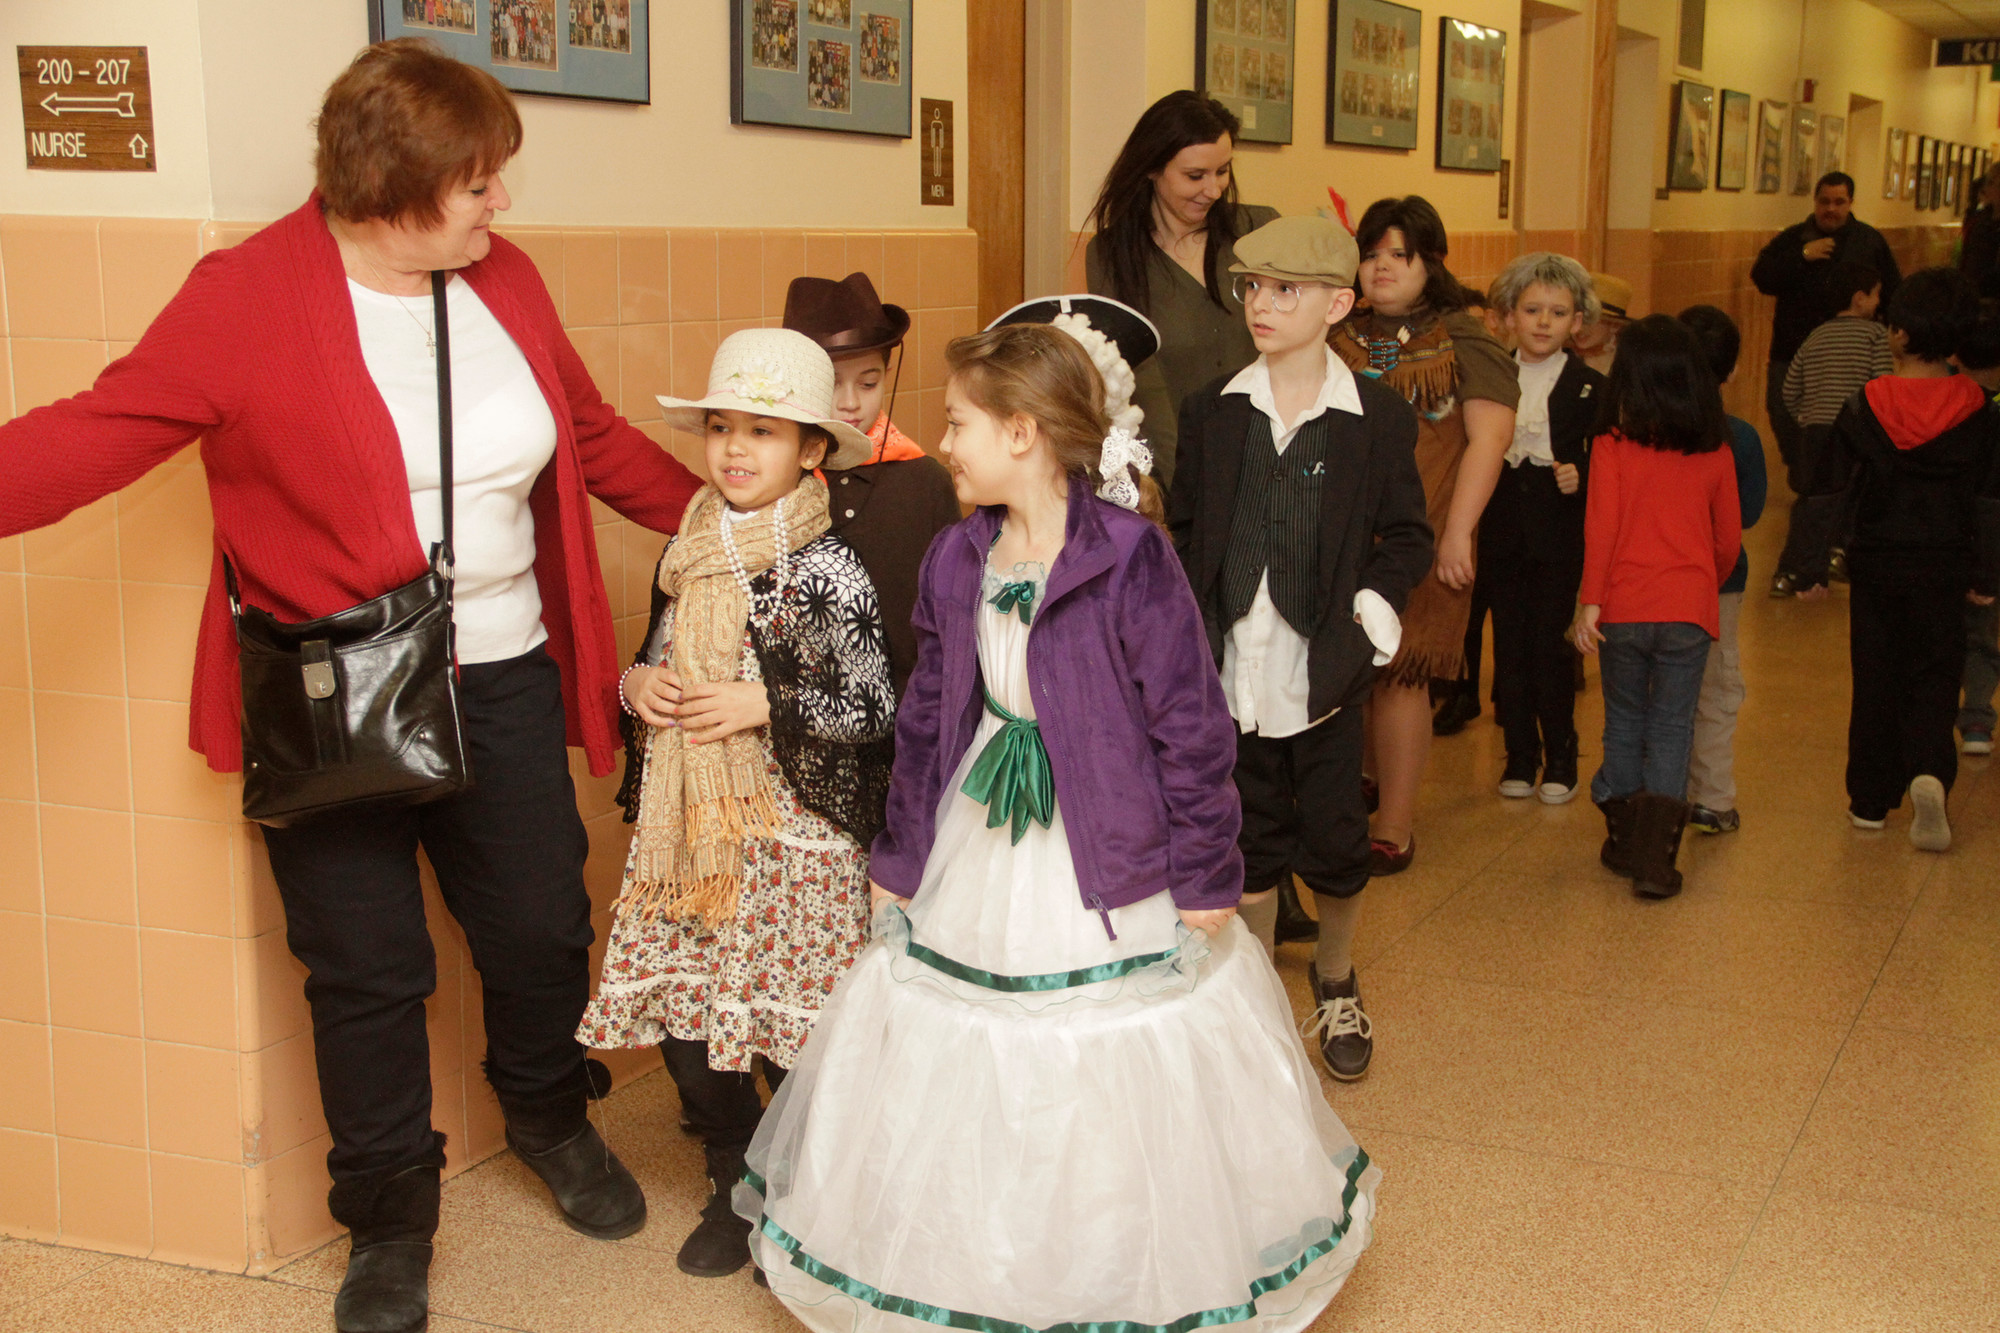 The children dressed like different historical figures, showing off their costumes while walking through the halls.